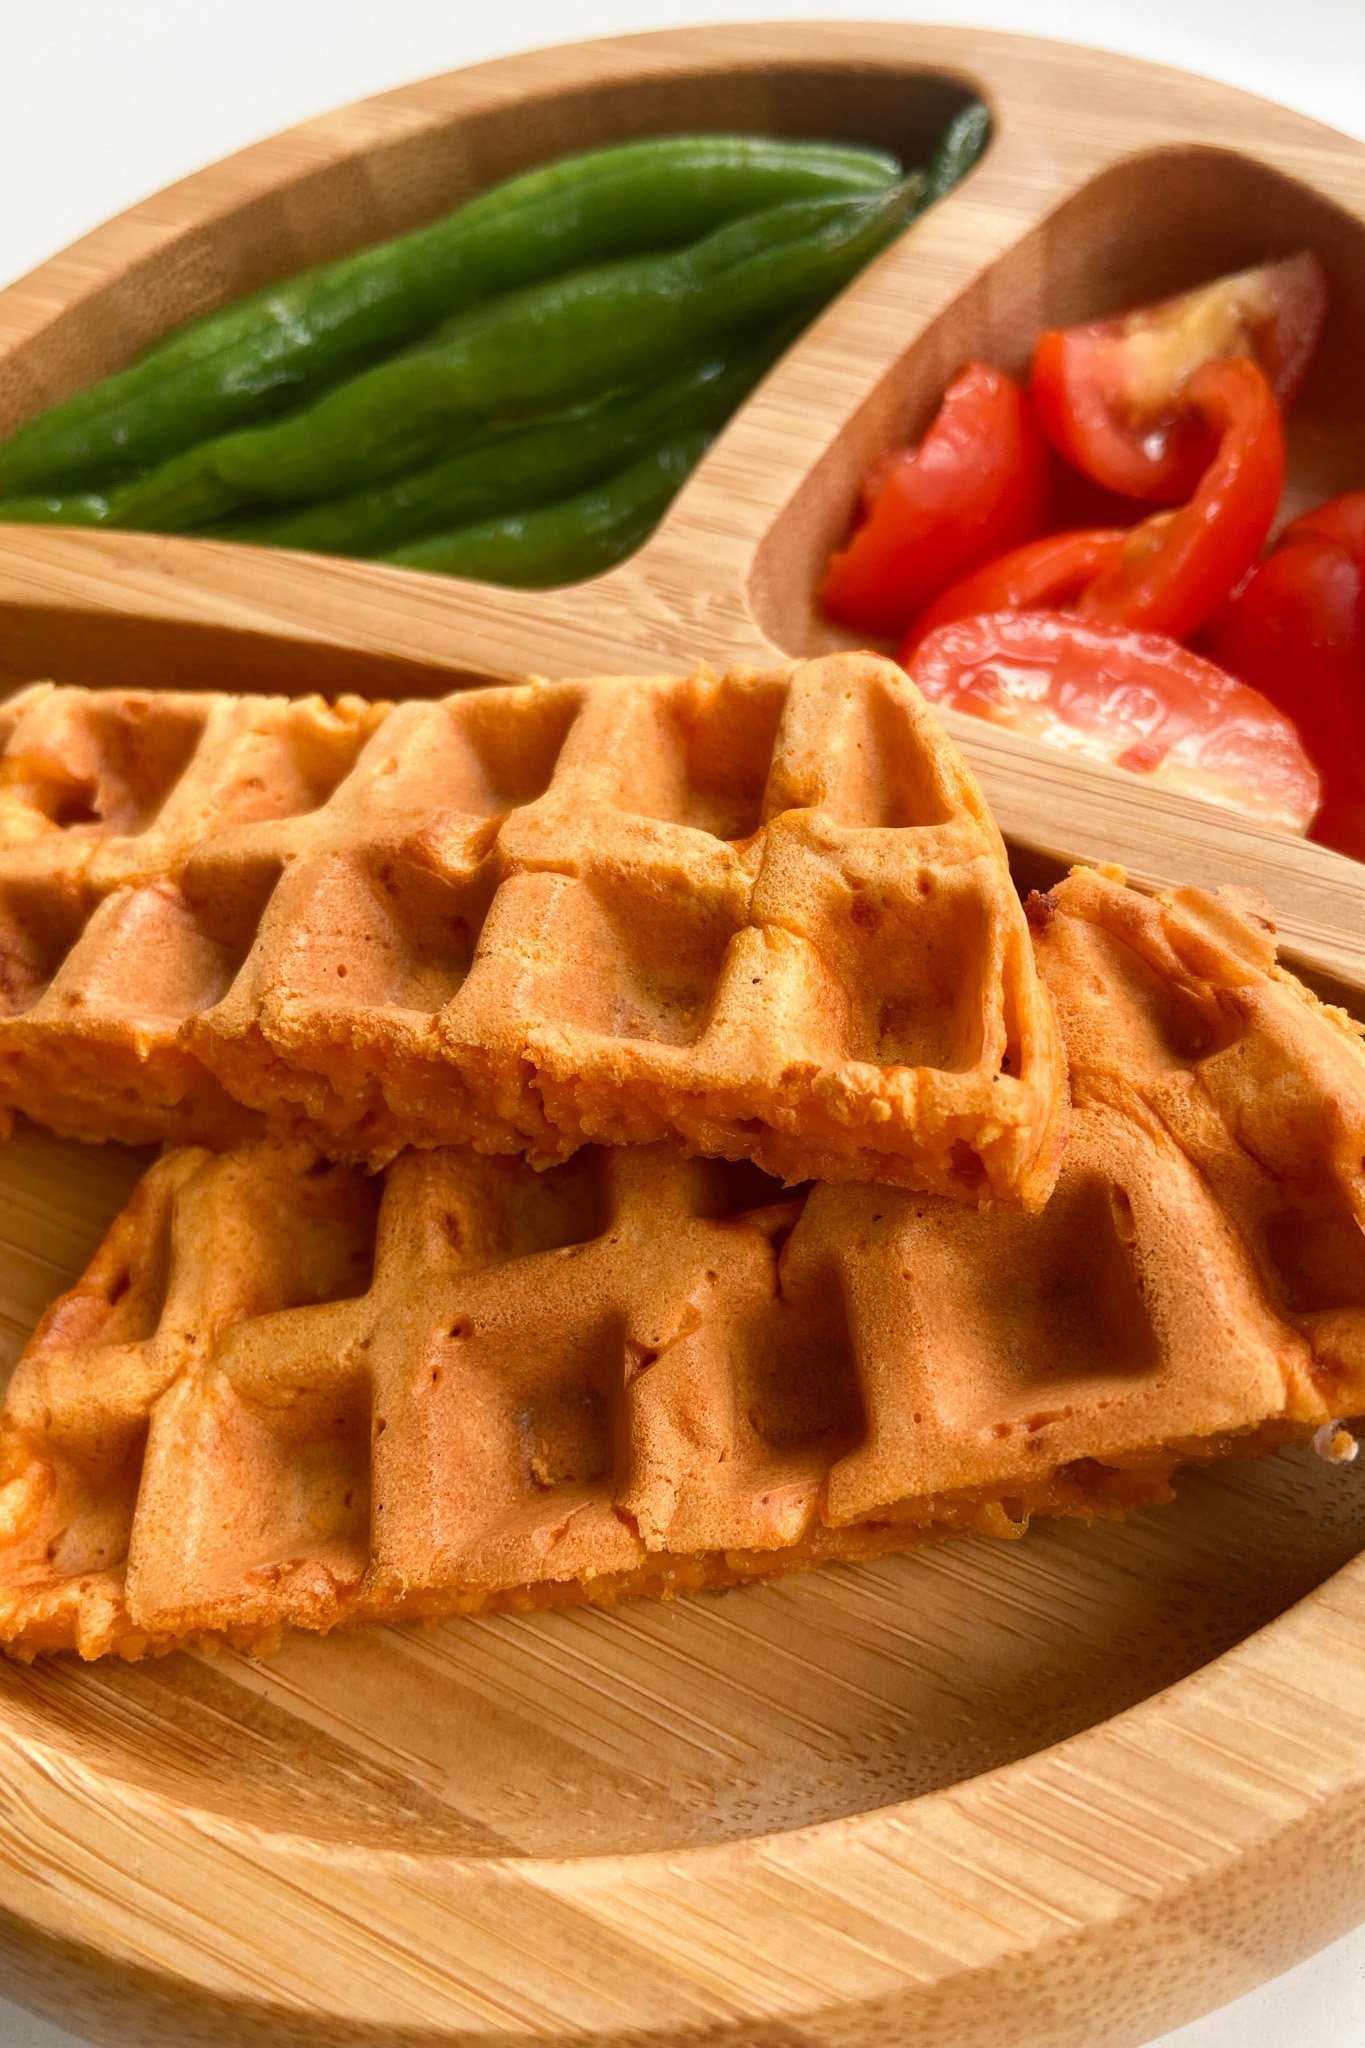 Pizza waffles served with green beans and quartered tomatoes